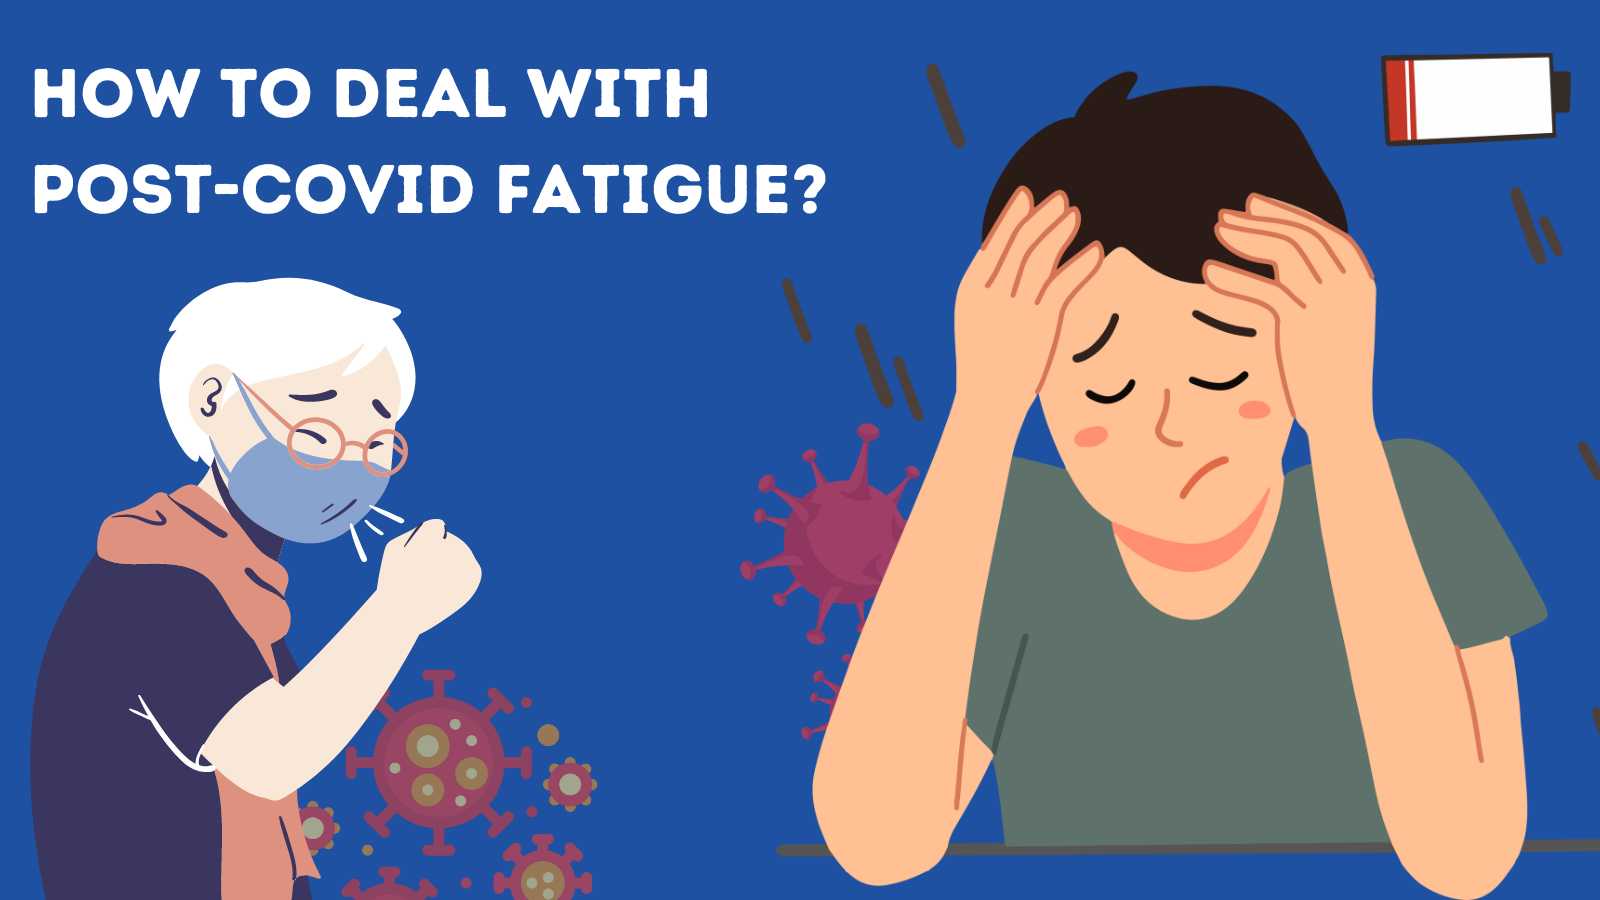 How To Deal With Post-Covid Fatigue